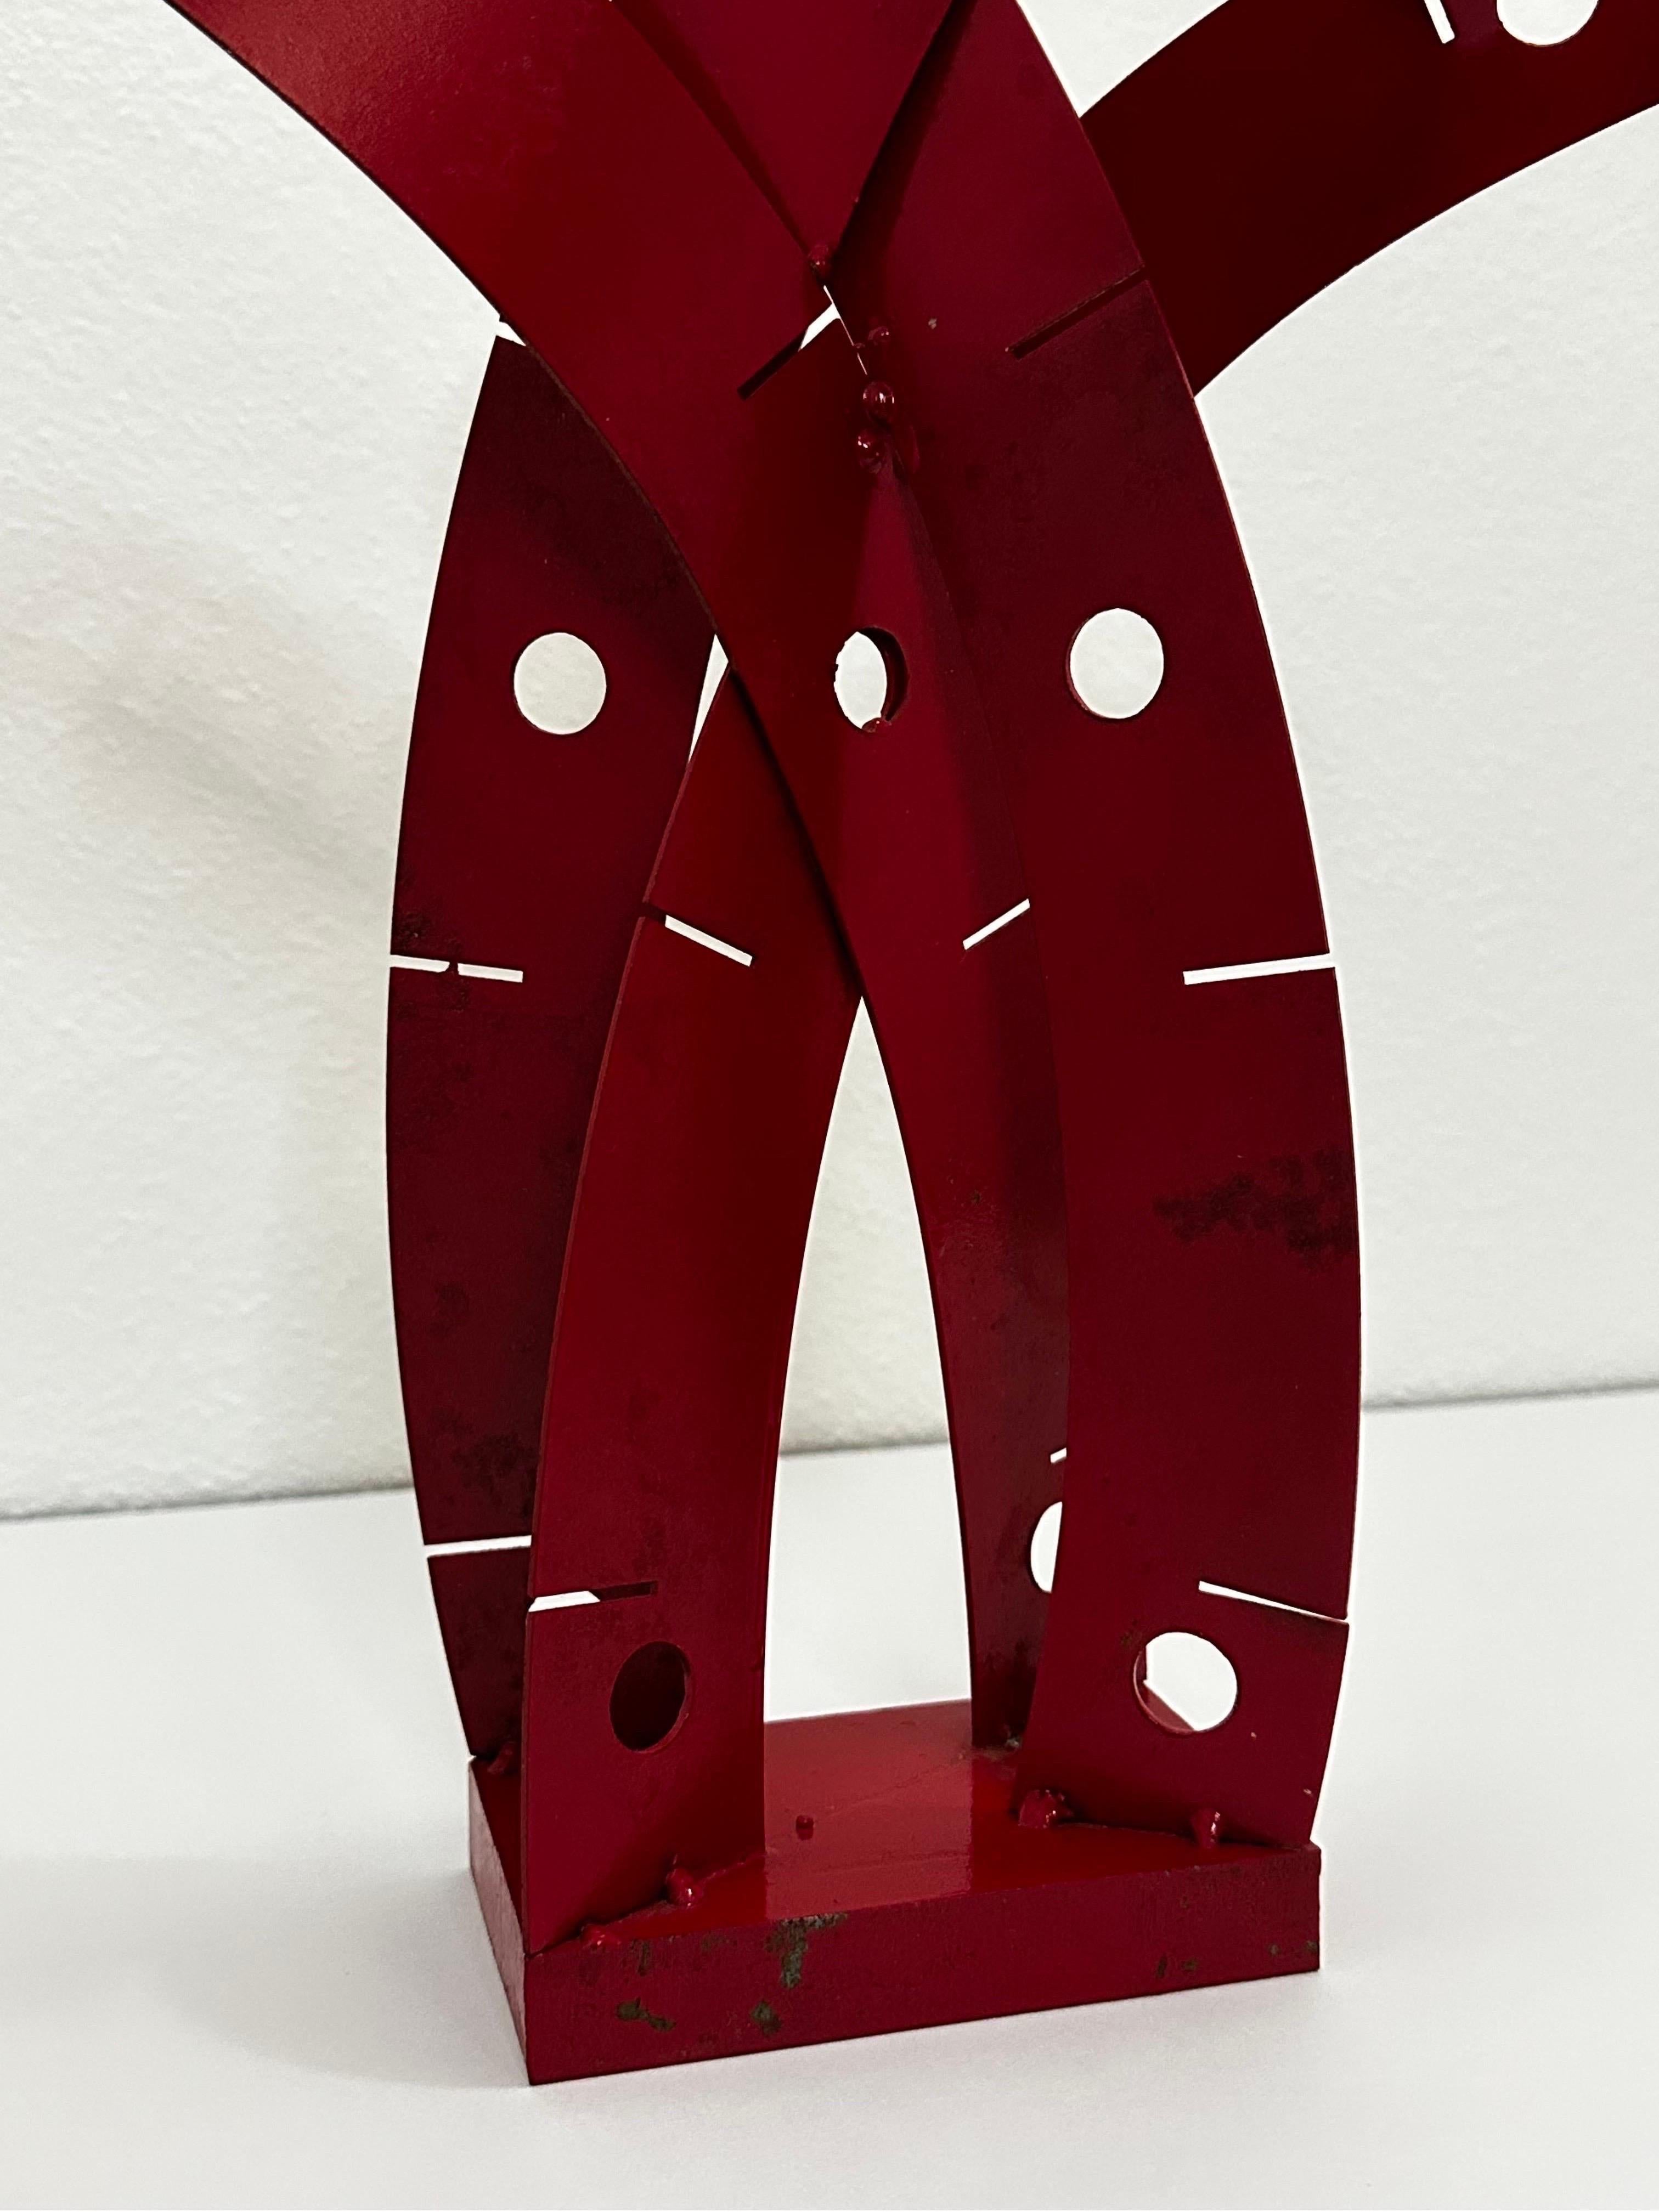 Brazilian Modern Red Lacquered Steel Table Sculpture, 1980s For Sale 3